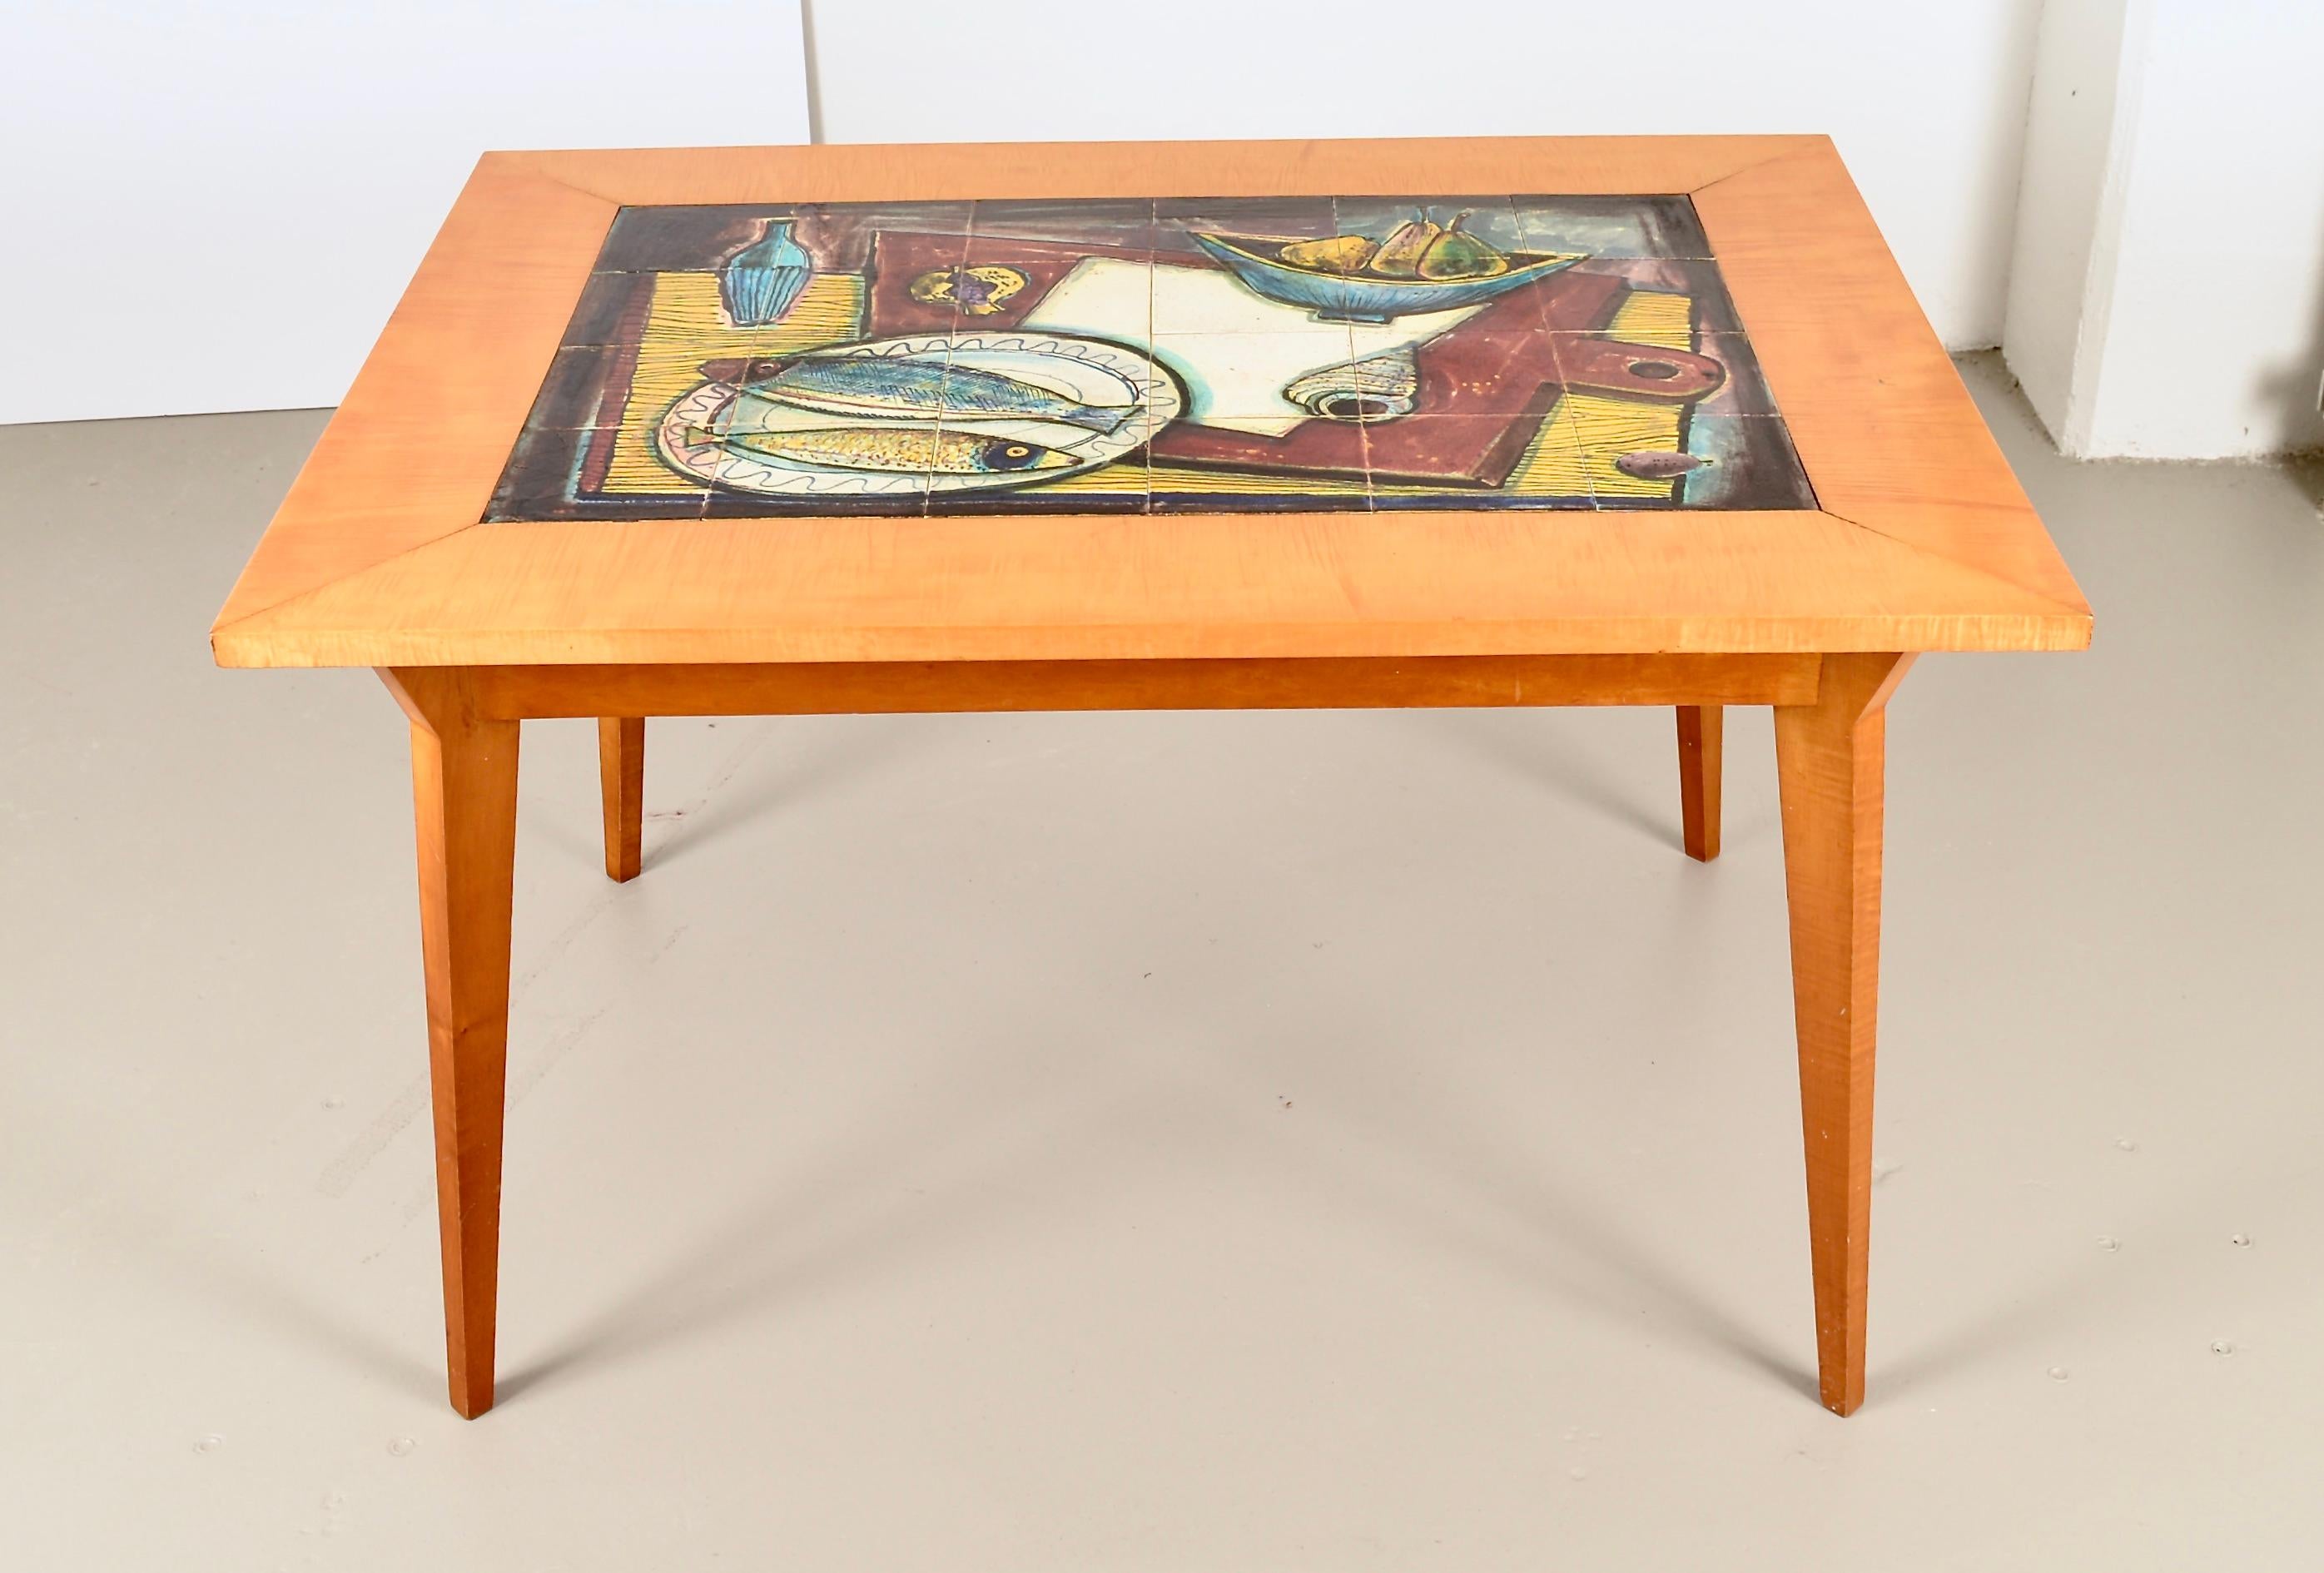 Handsome tile top table, made in France, circa 1950s. Wood base is tiger maple, in a soft satin finish. The colorful tiles are likely made in Biot, France and show a still life featuring fish and fruit. Beautifully made and in excellent condition.